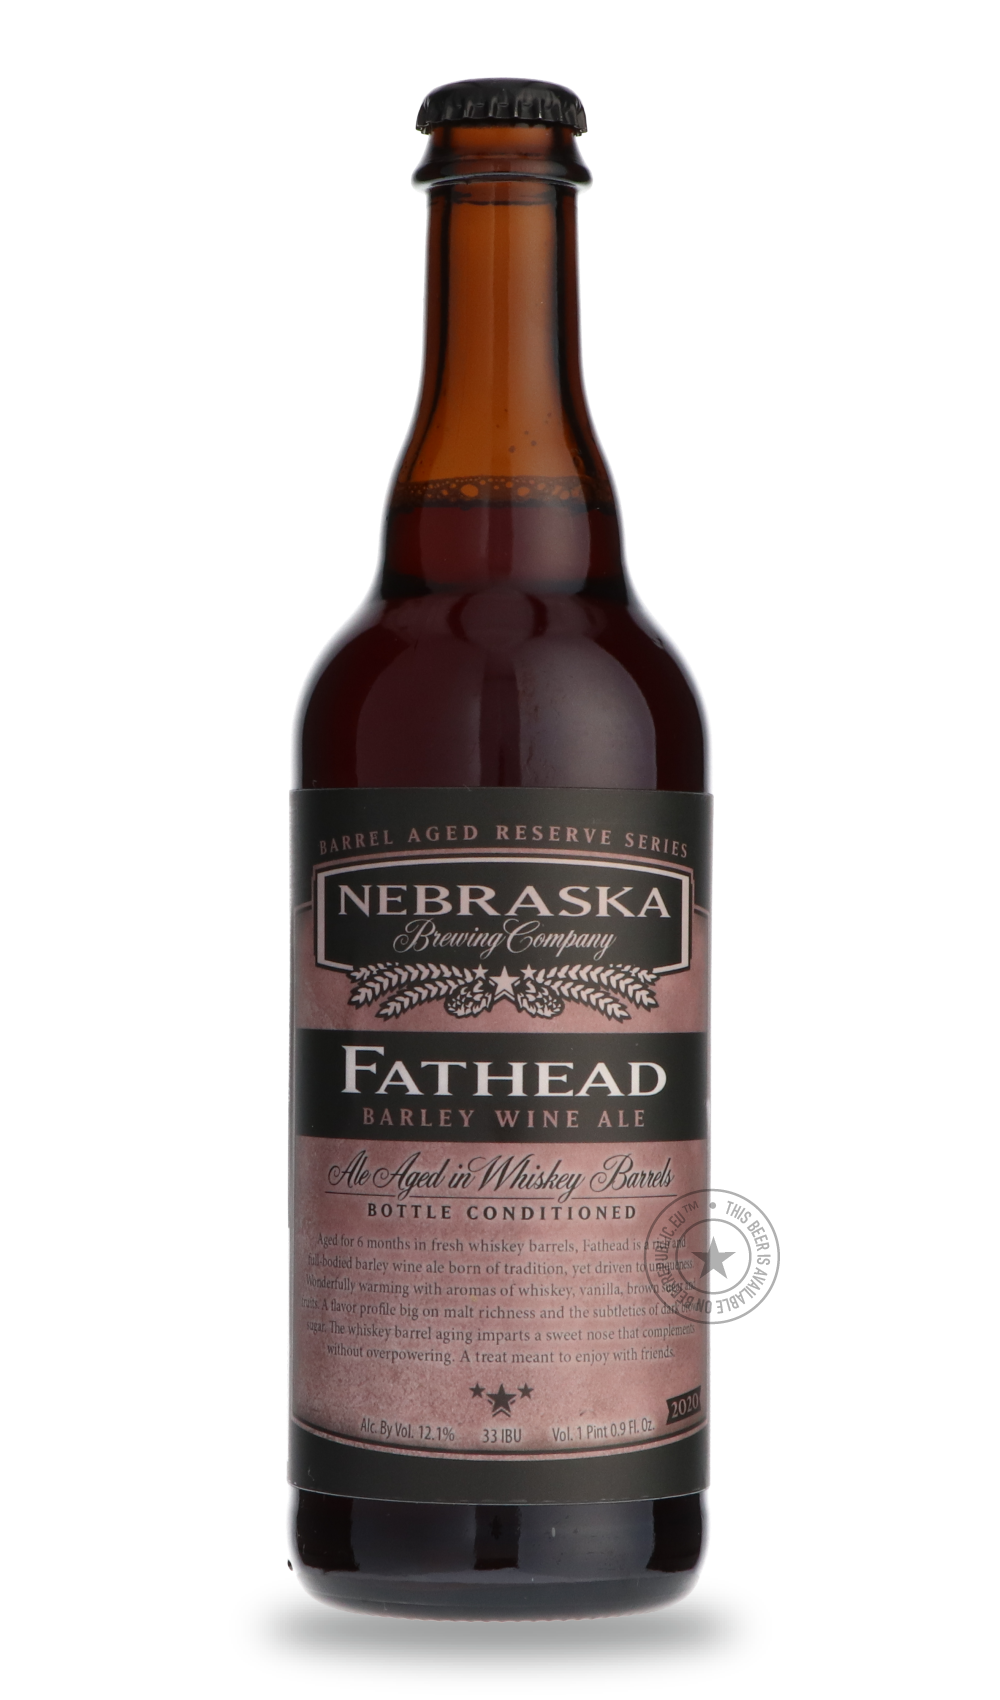 -Nebraska- Fathead-Brown & Dark- Only @ Beer Republic - The best online beer store for American & Canadian craft beer - Buy beer online from the USA and Canada - Bier online kopen - Amerikaans bier kopen - Craft beer store - Craft beer kopen - Amerikanisch bier kaufen - Bier online kaufen - Acheter biere online - IPA - Stout - Porter - New England IPA - Hazy IPA - Imperial Stout - Barrel Aged - Barrel Aged Imperial Stout - Brown - Dark beer - Blond - Blonde - Pilsner - Lager - Wheat - Weizen - Amber - Barle